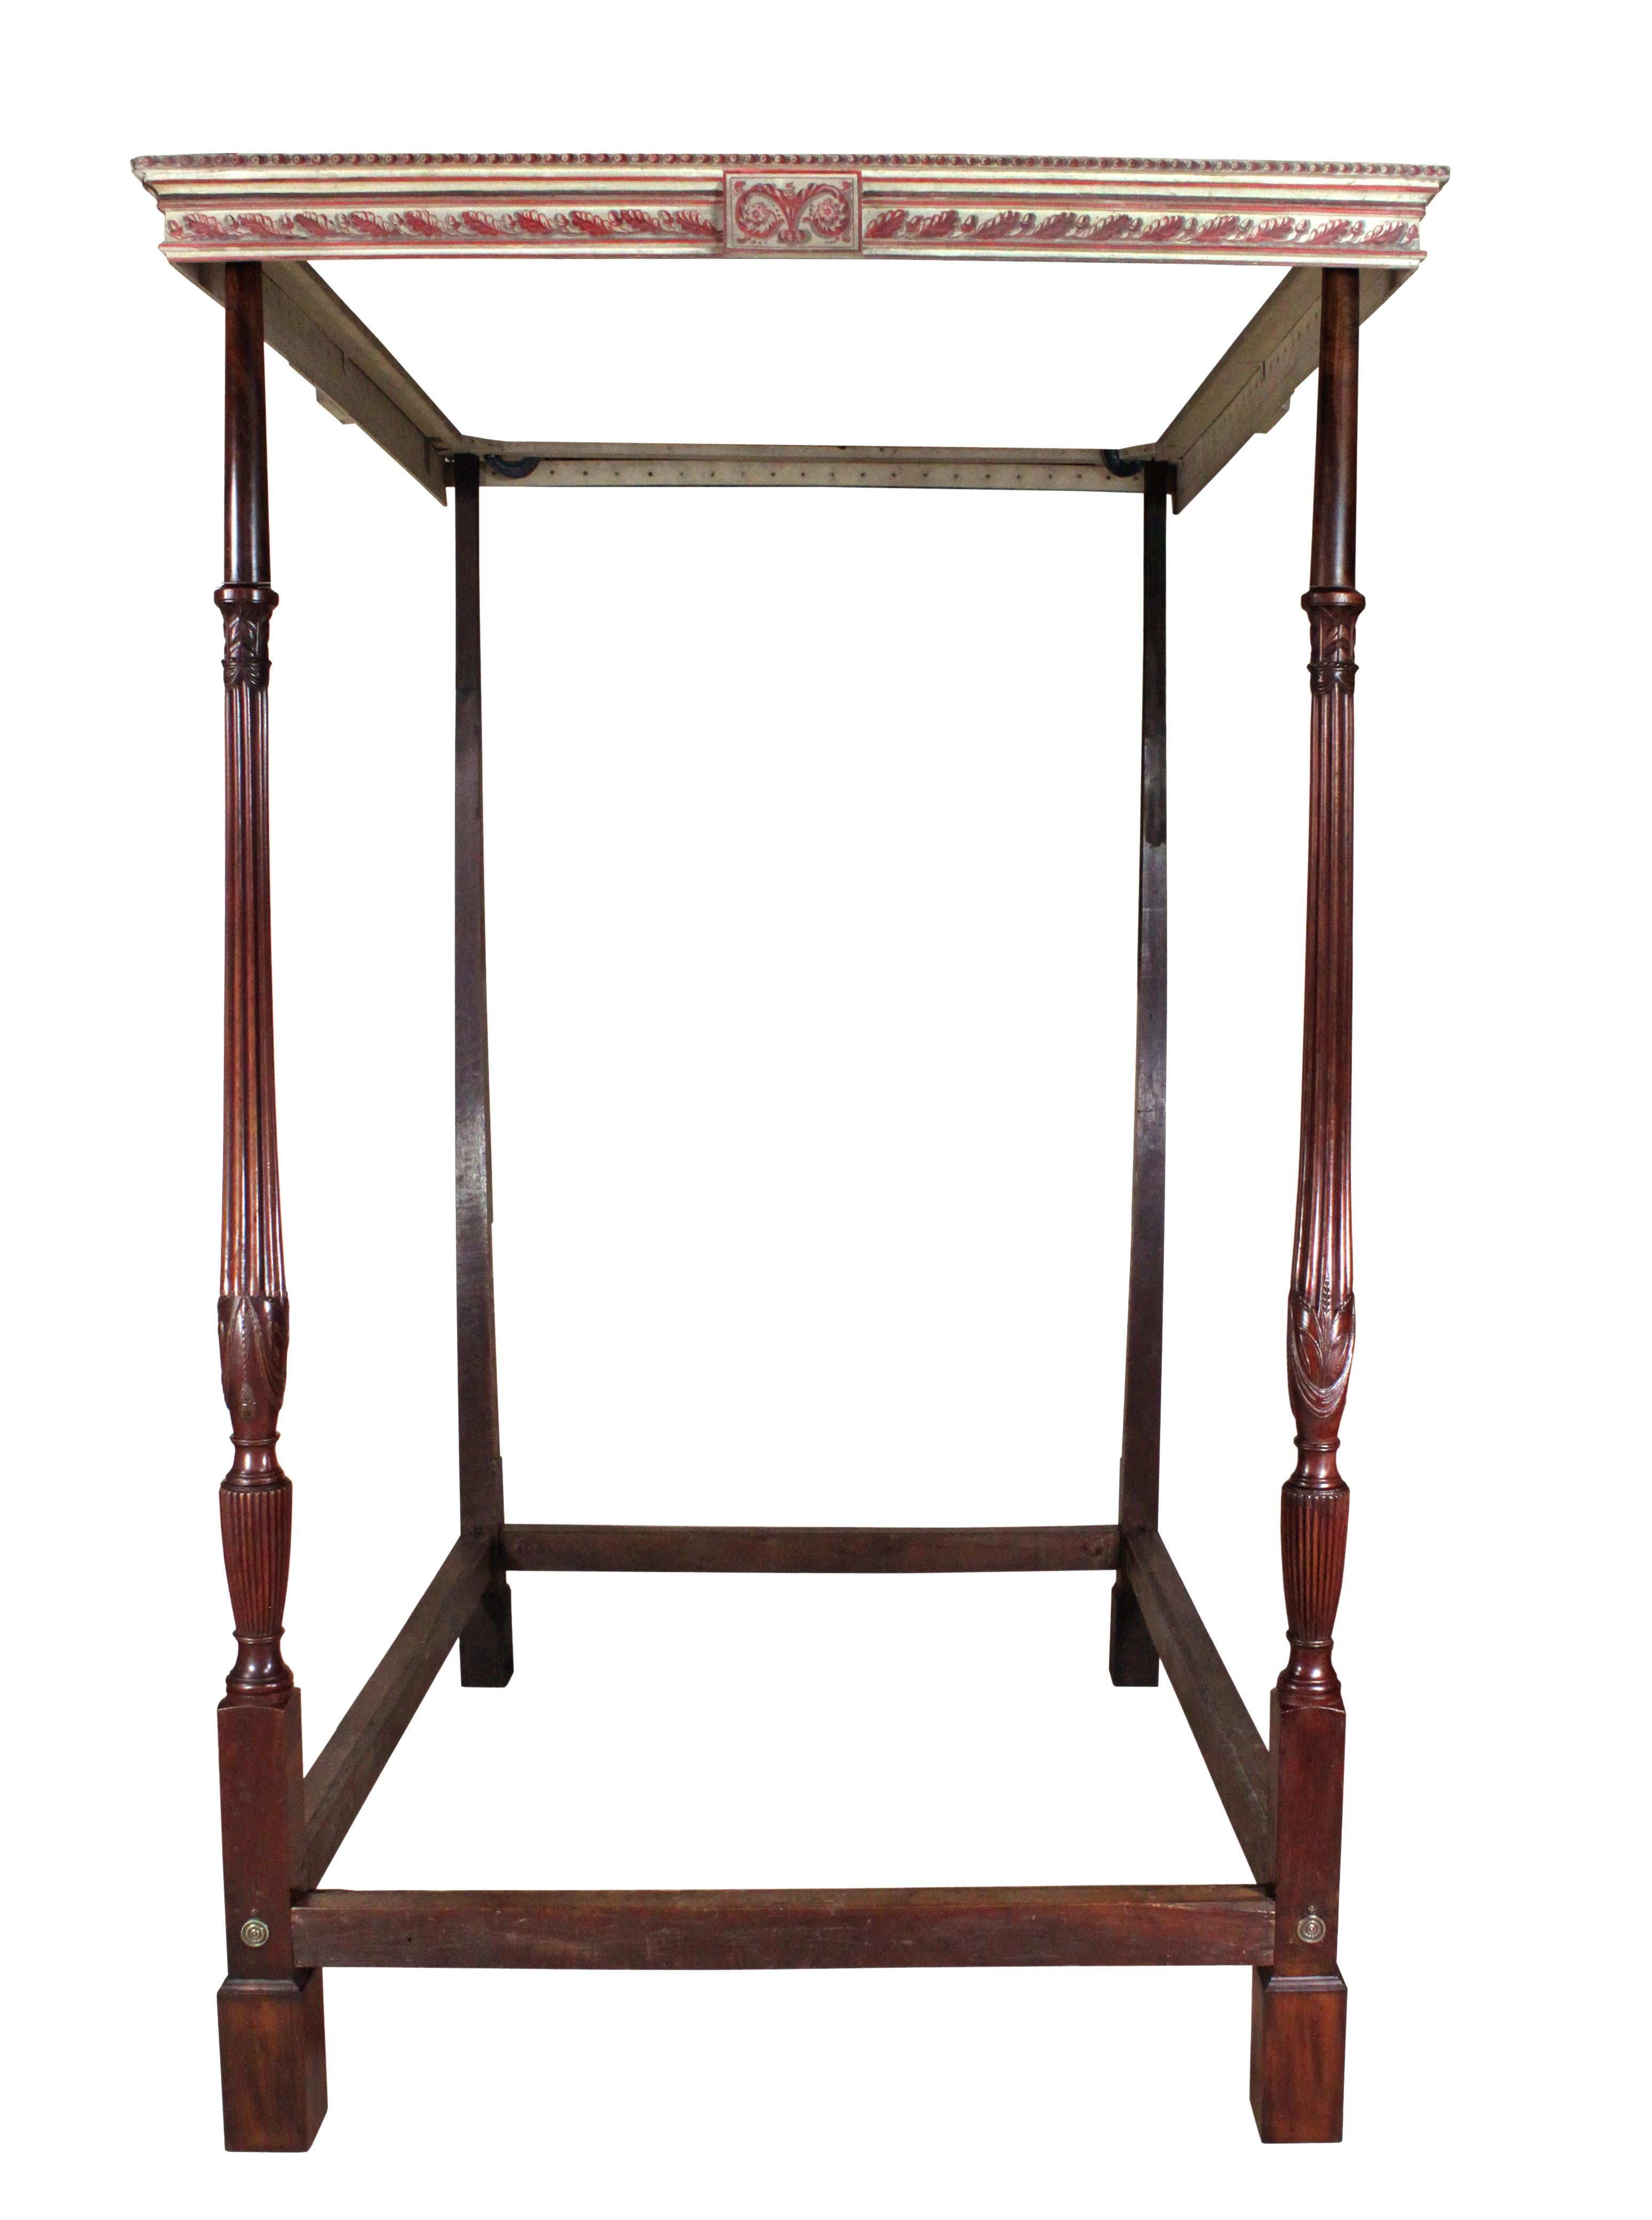 A George III four poster bed with mahogany end posts finely carved with wheat sheaves and drapery, painted cornice in attractive Etruscan colours and oak head posts and oak rails.
The bed including the cornice is largely original but the posts have